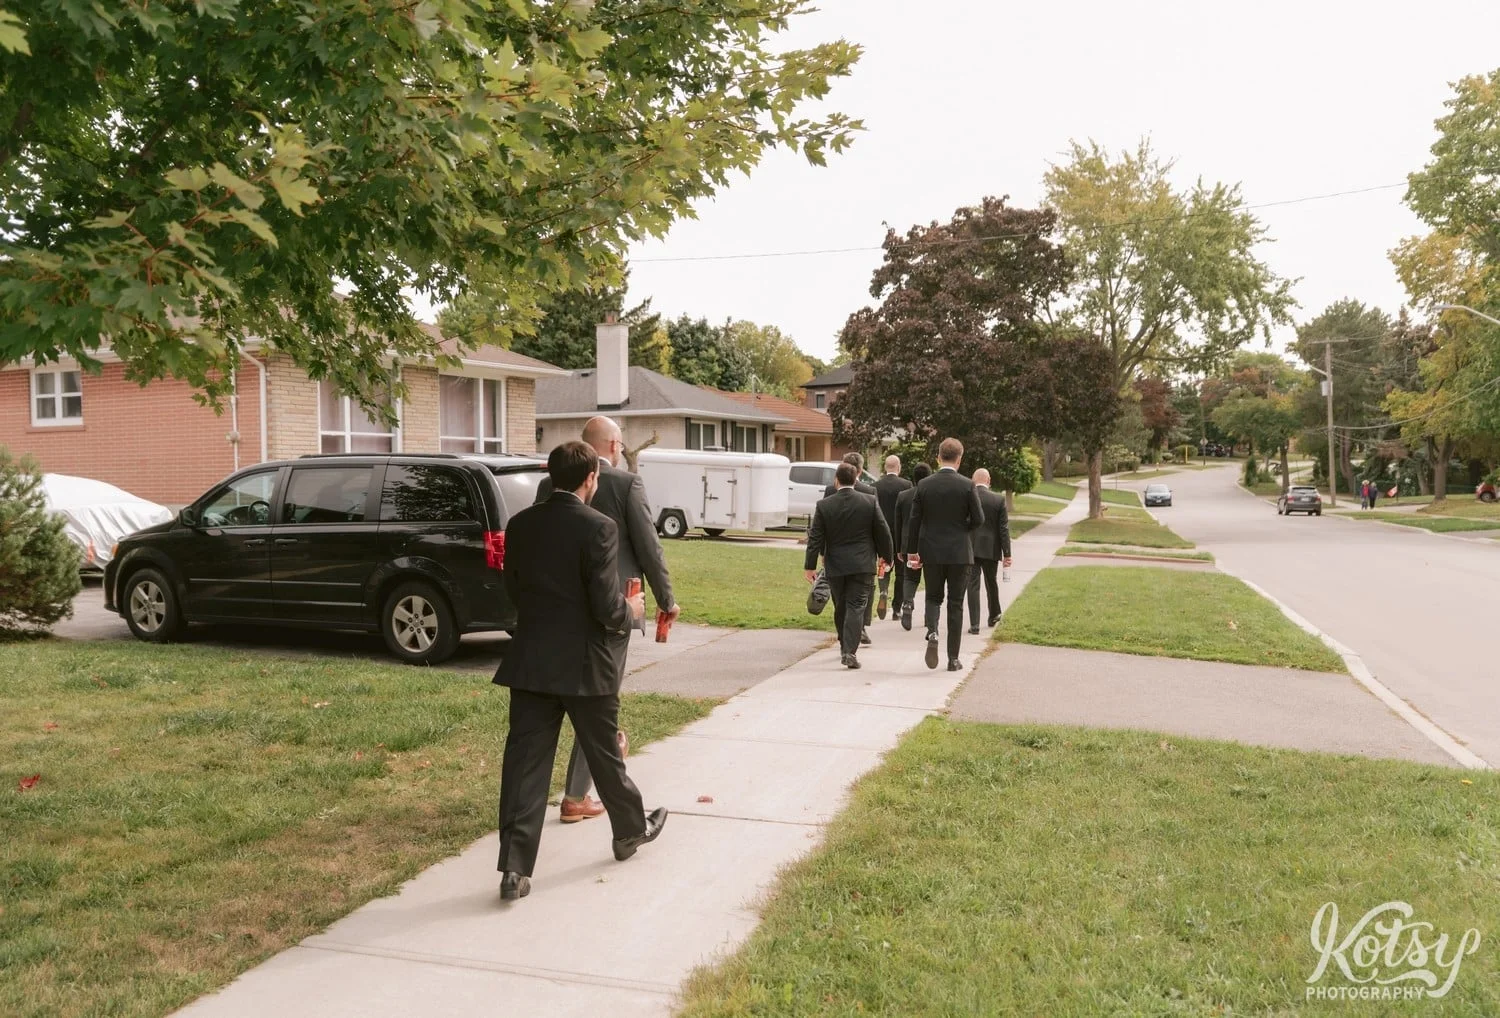 Rear view of a group of eight groomsmen and a groom walking on a sidewalk in a residential neighborhood towards a park